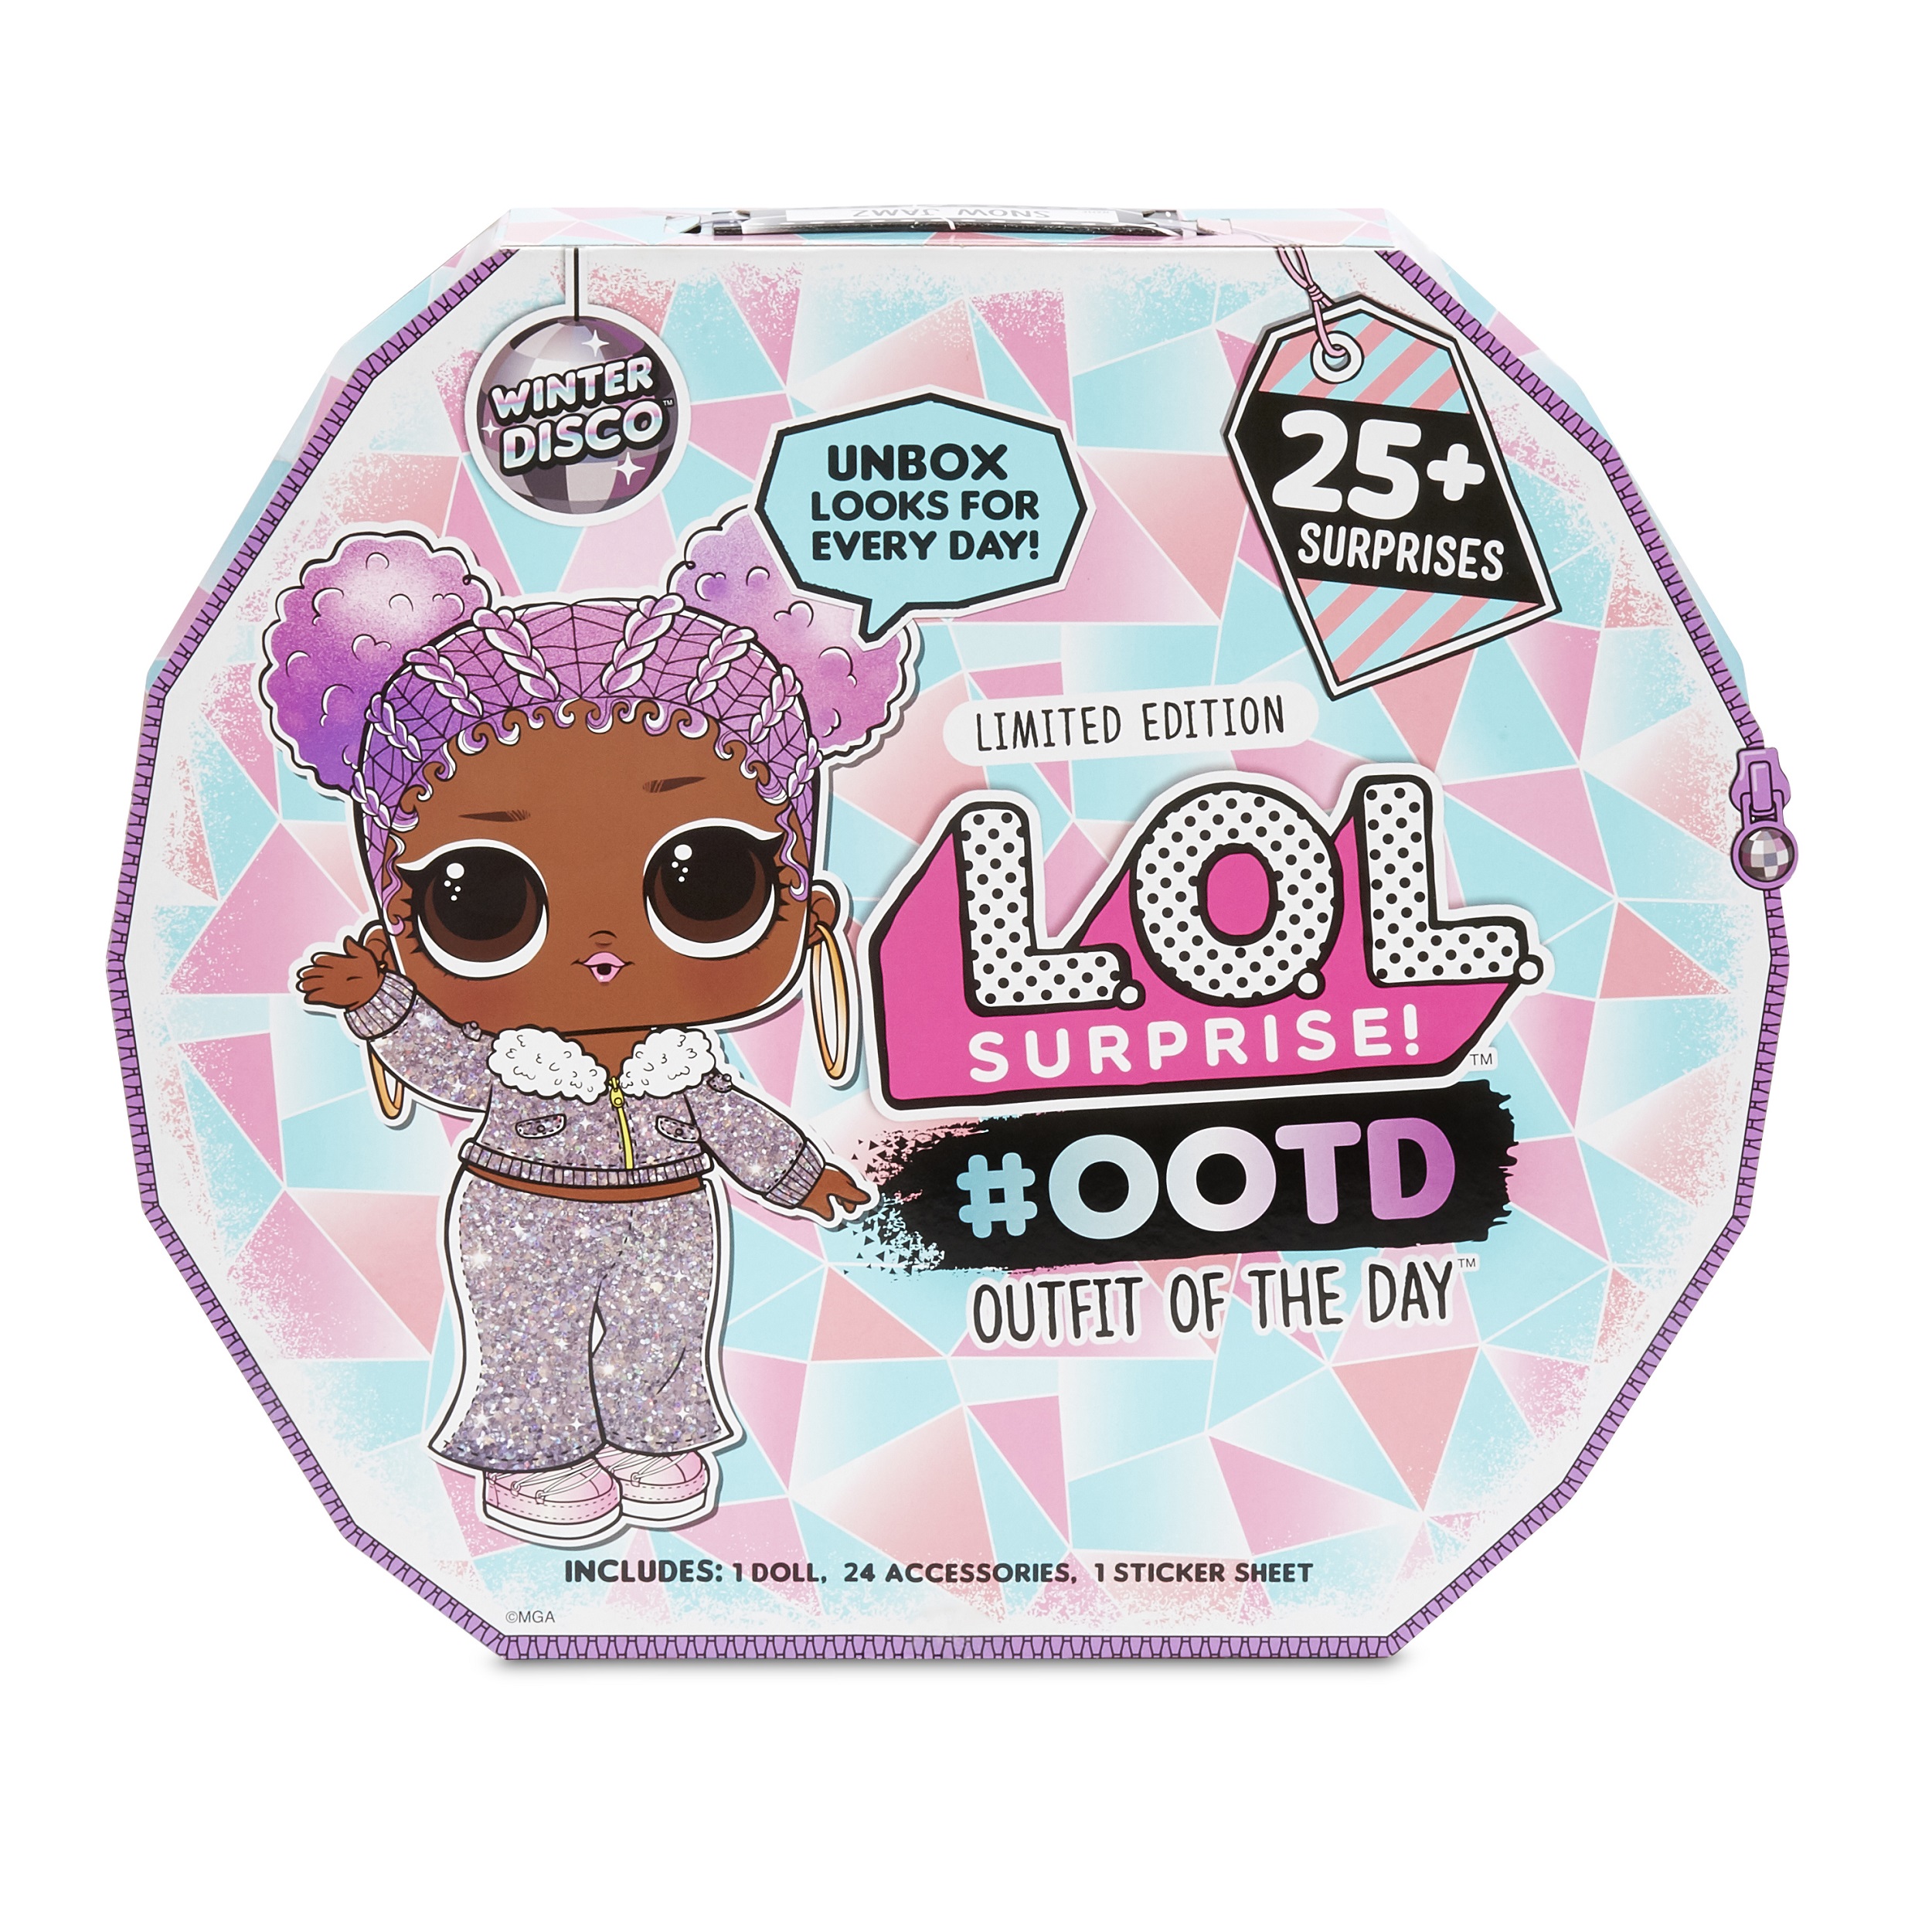 LOL Surprise #OOTD (Outfit of the Day) Winter Disco With Exclusive Doll & 25+ Surprises - image 1 of 5